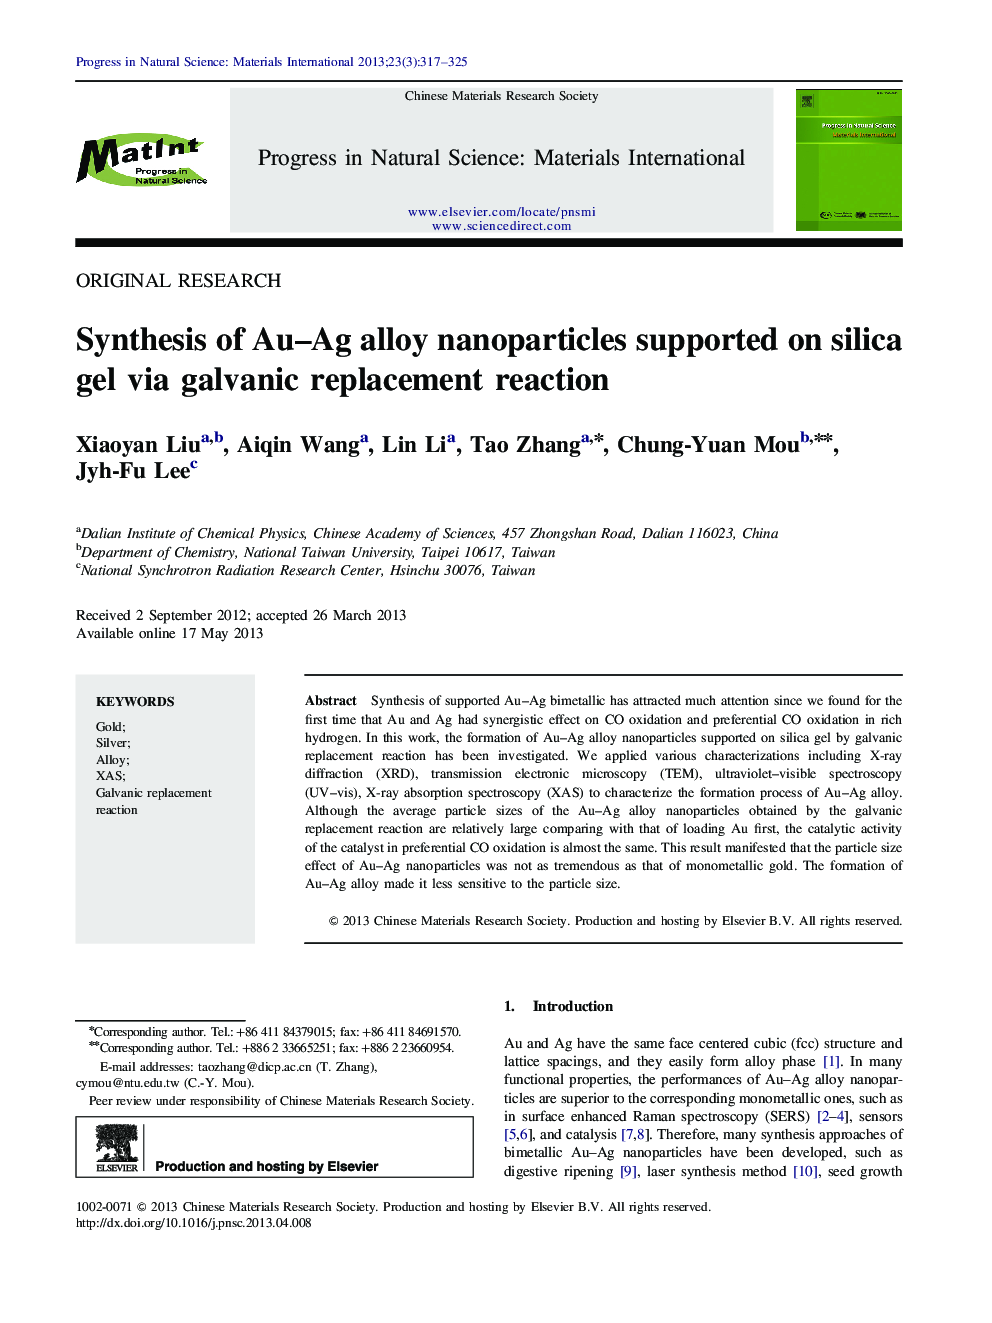 Synthesis of Au–Ag alloy nanoparticles supported on silica gel via galvanic replacement reaction 